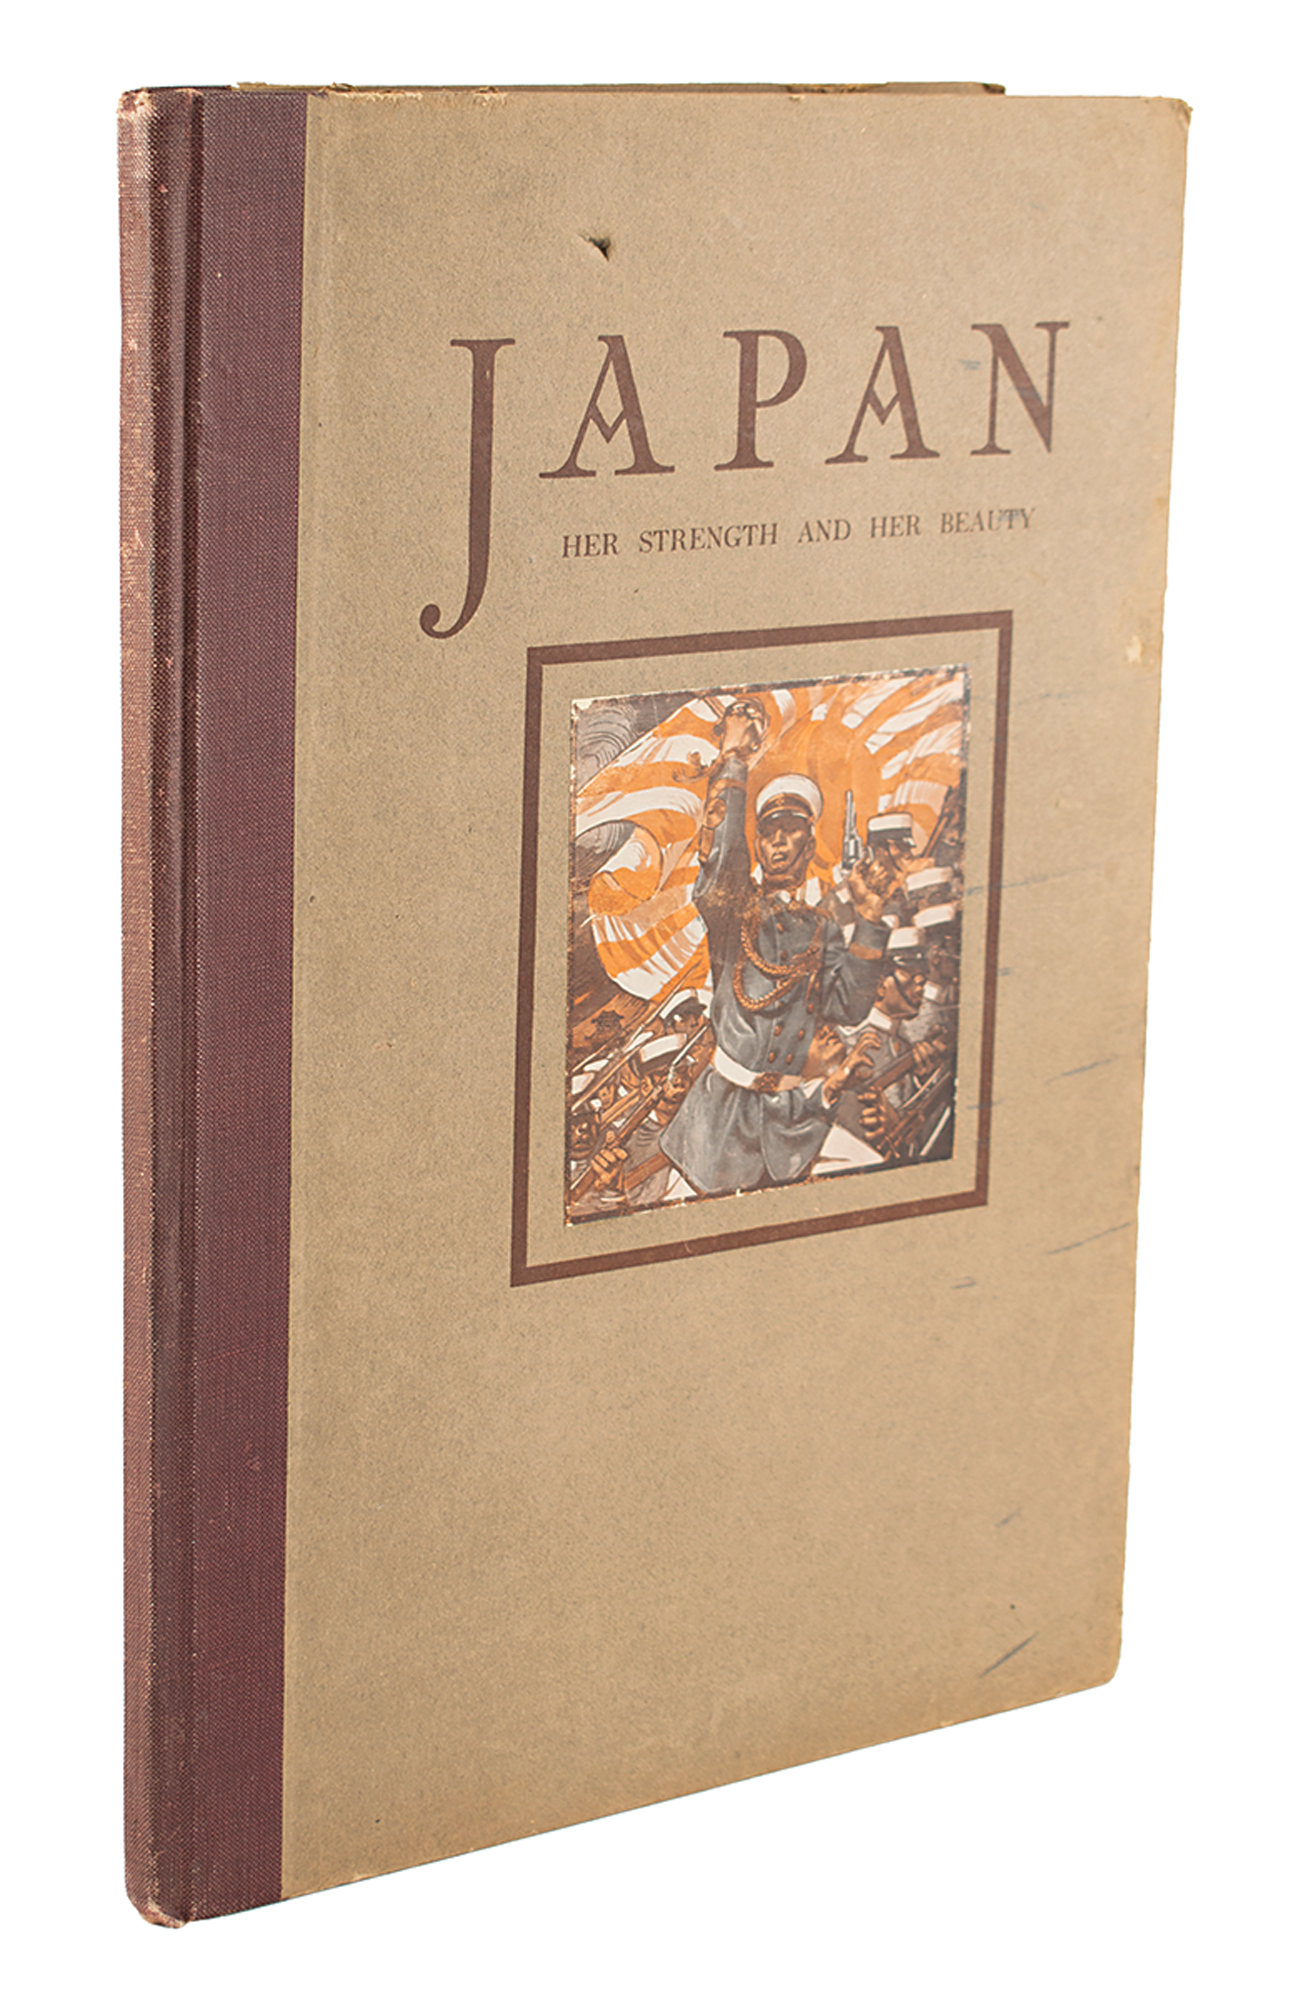 Lot #351 Japan: Her Strength and Her Beauty (1904) - First Edition Book